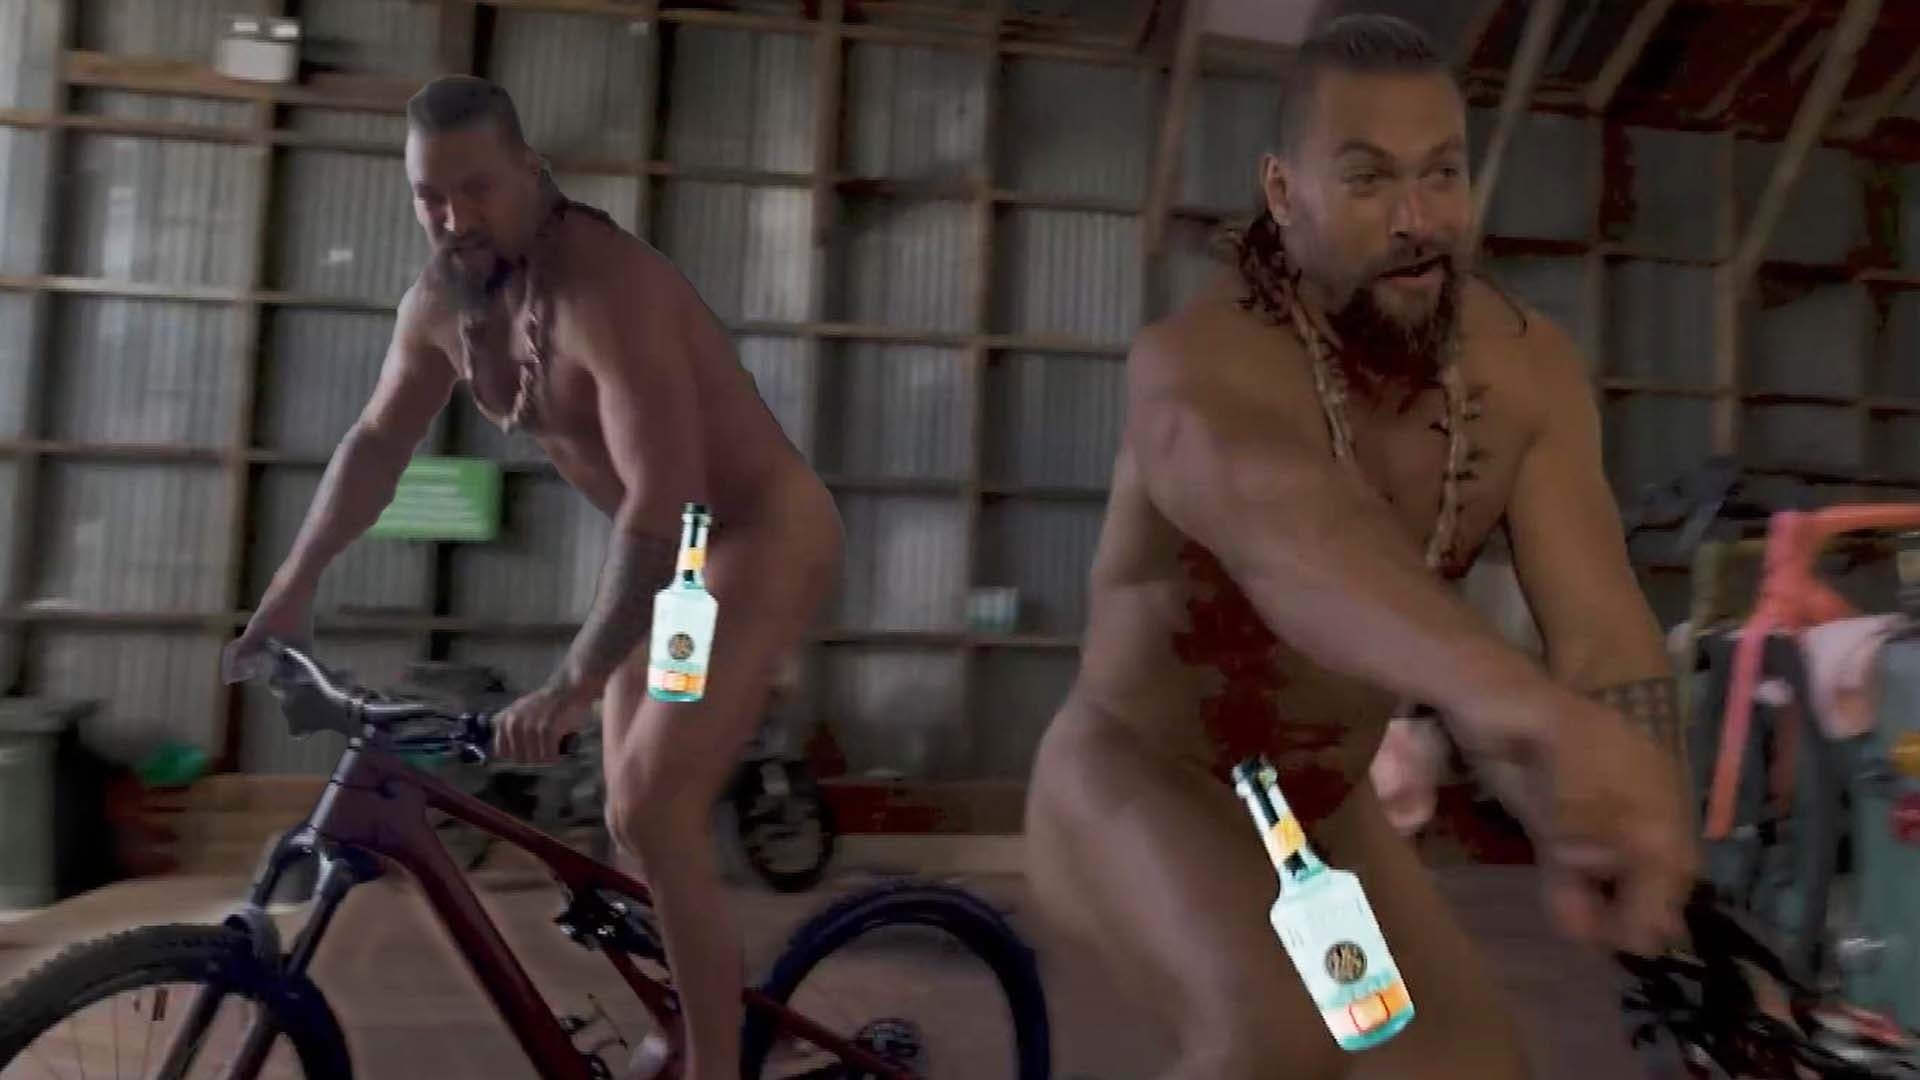 Jamie Lee Curtis Pussy - Jason Momoa Rides Bicycle Nude During Tour of His Private Gym